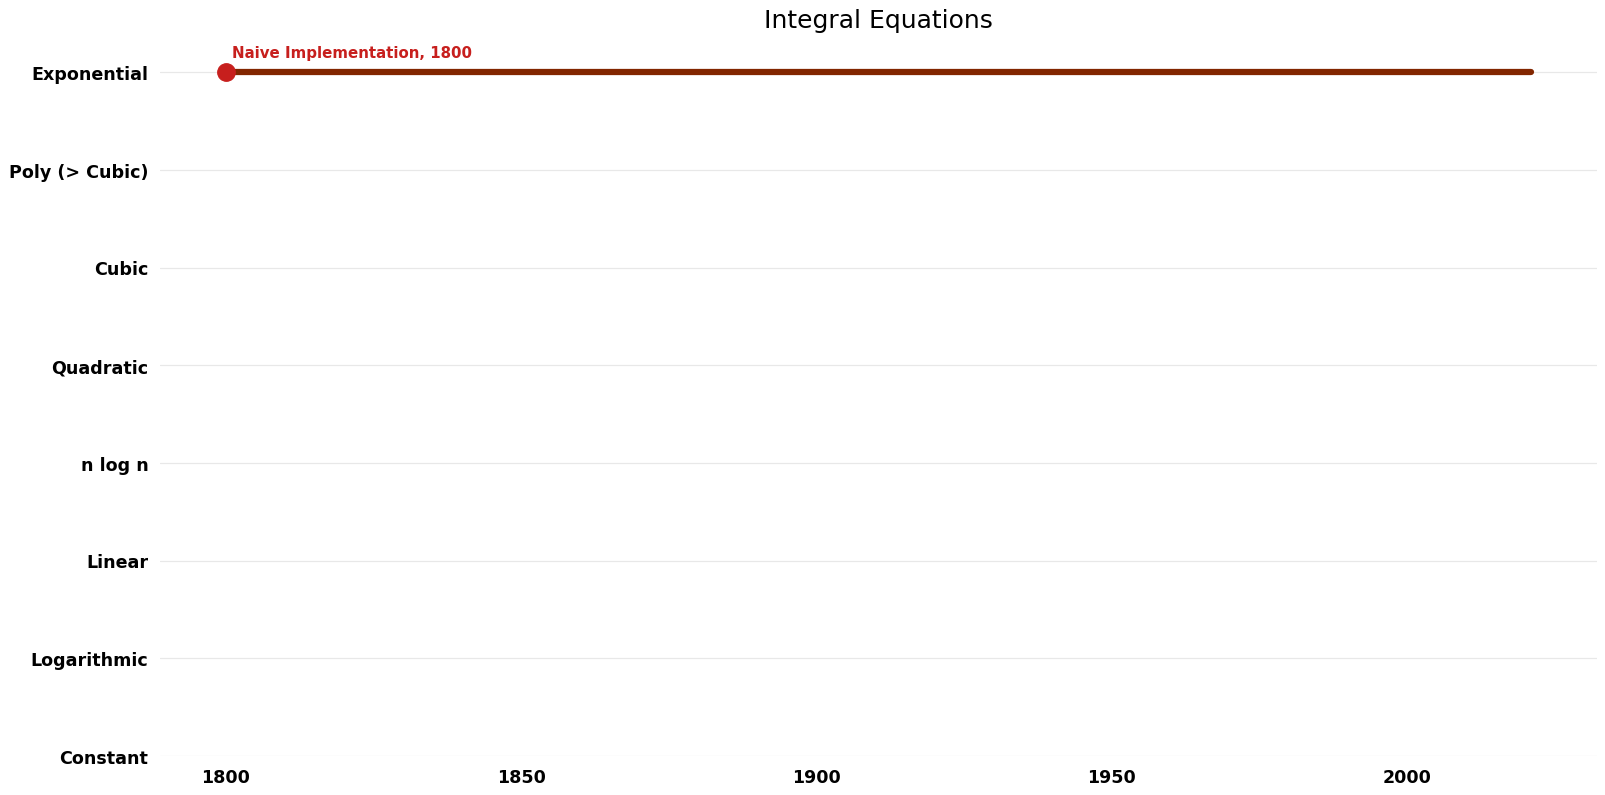 File:Integral Equations - Time.png